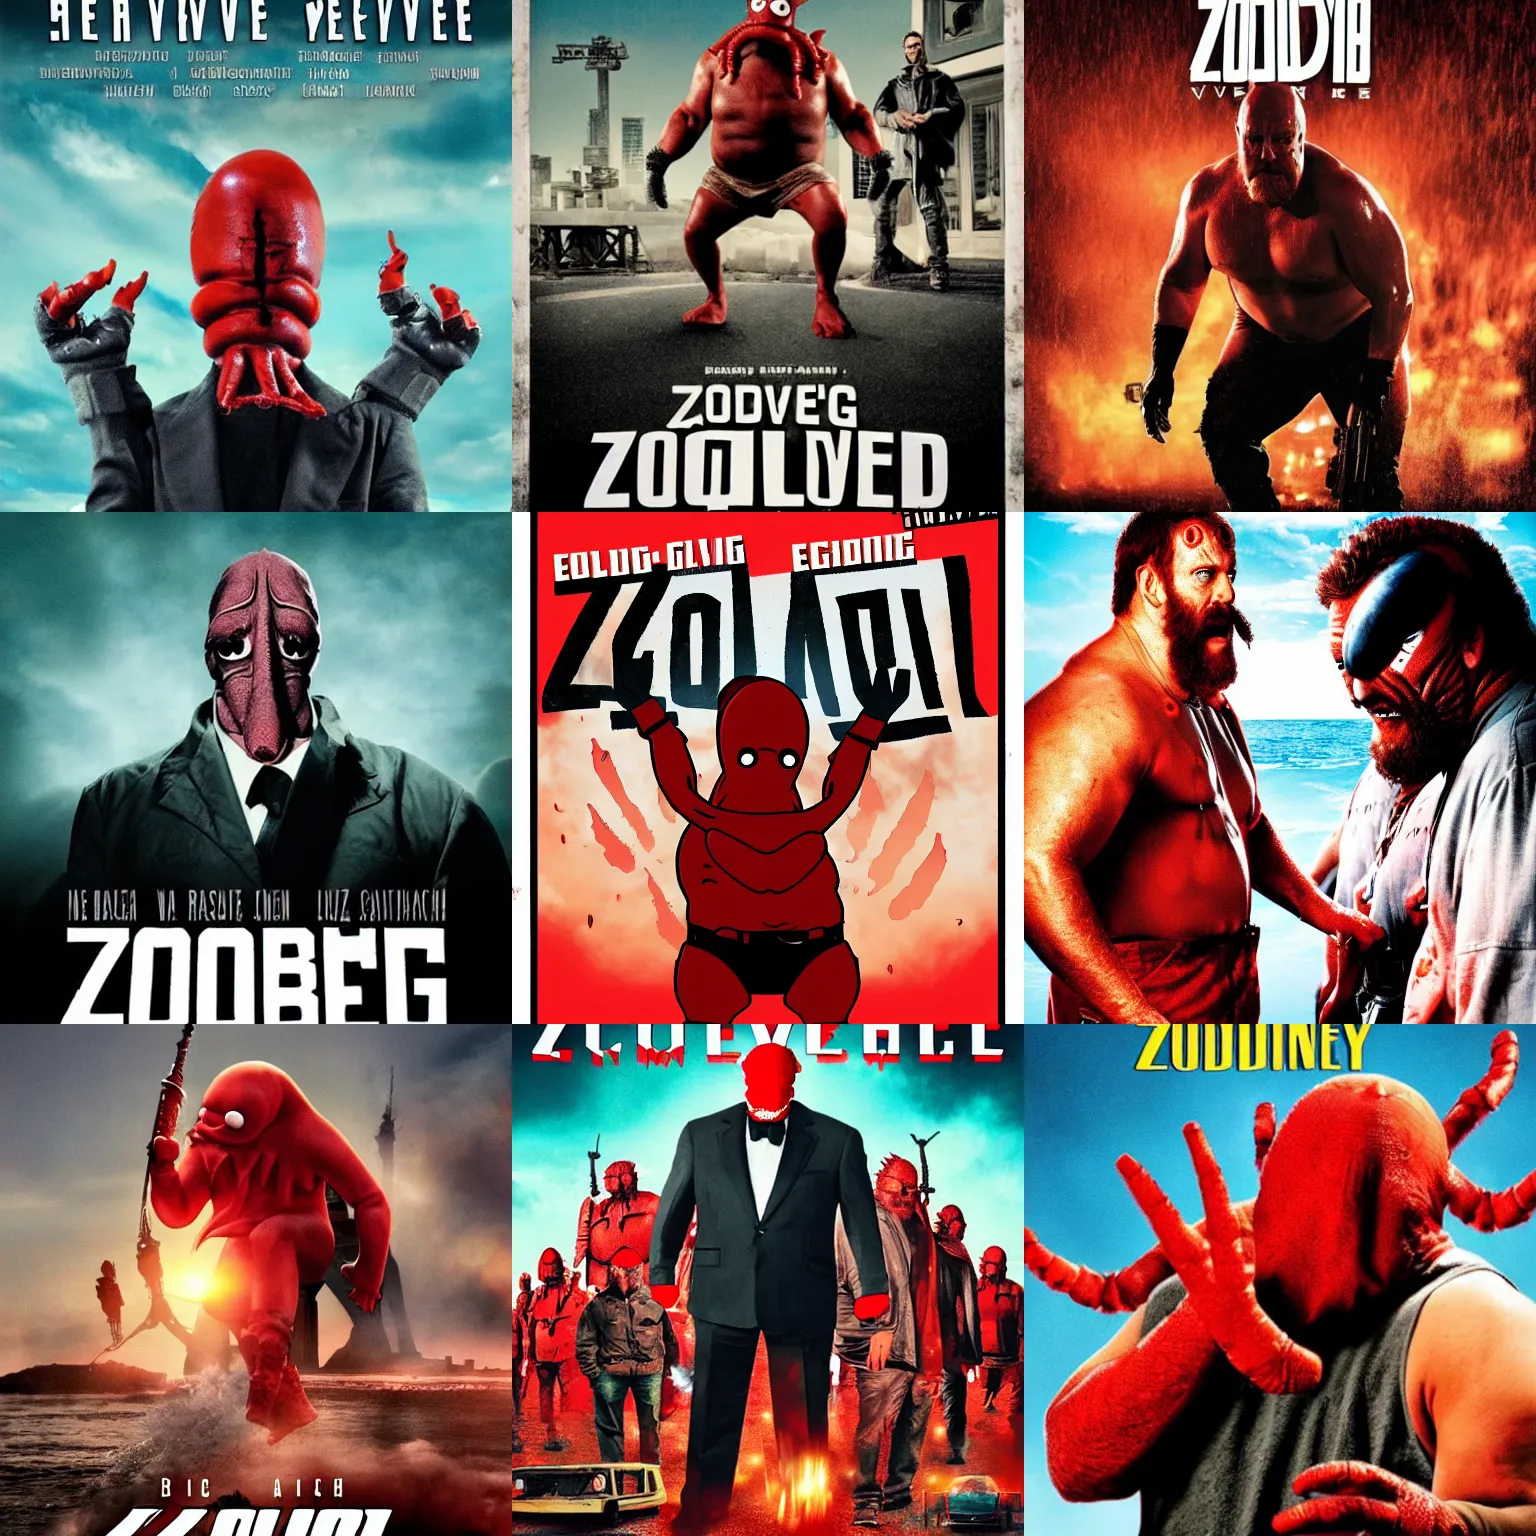 Prompt: Movie poster for a big-budget action movie titled 'Zoidberg's Revenge'